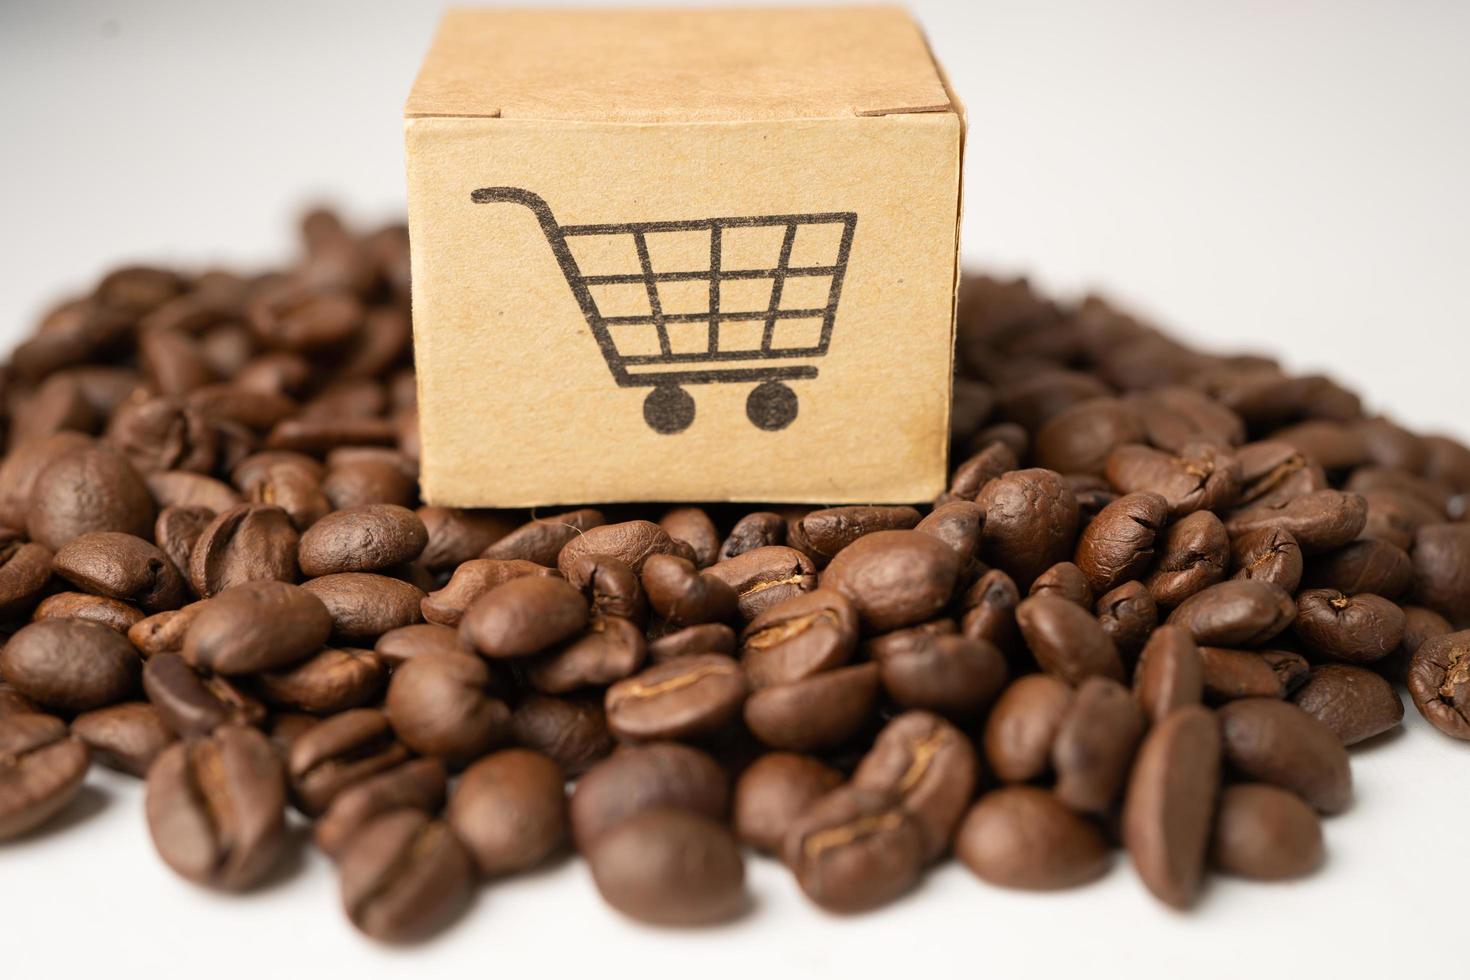 Box with shopping cart logo symbol on coffee beans photo